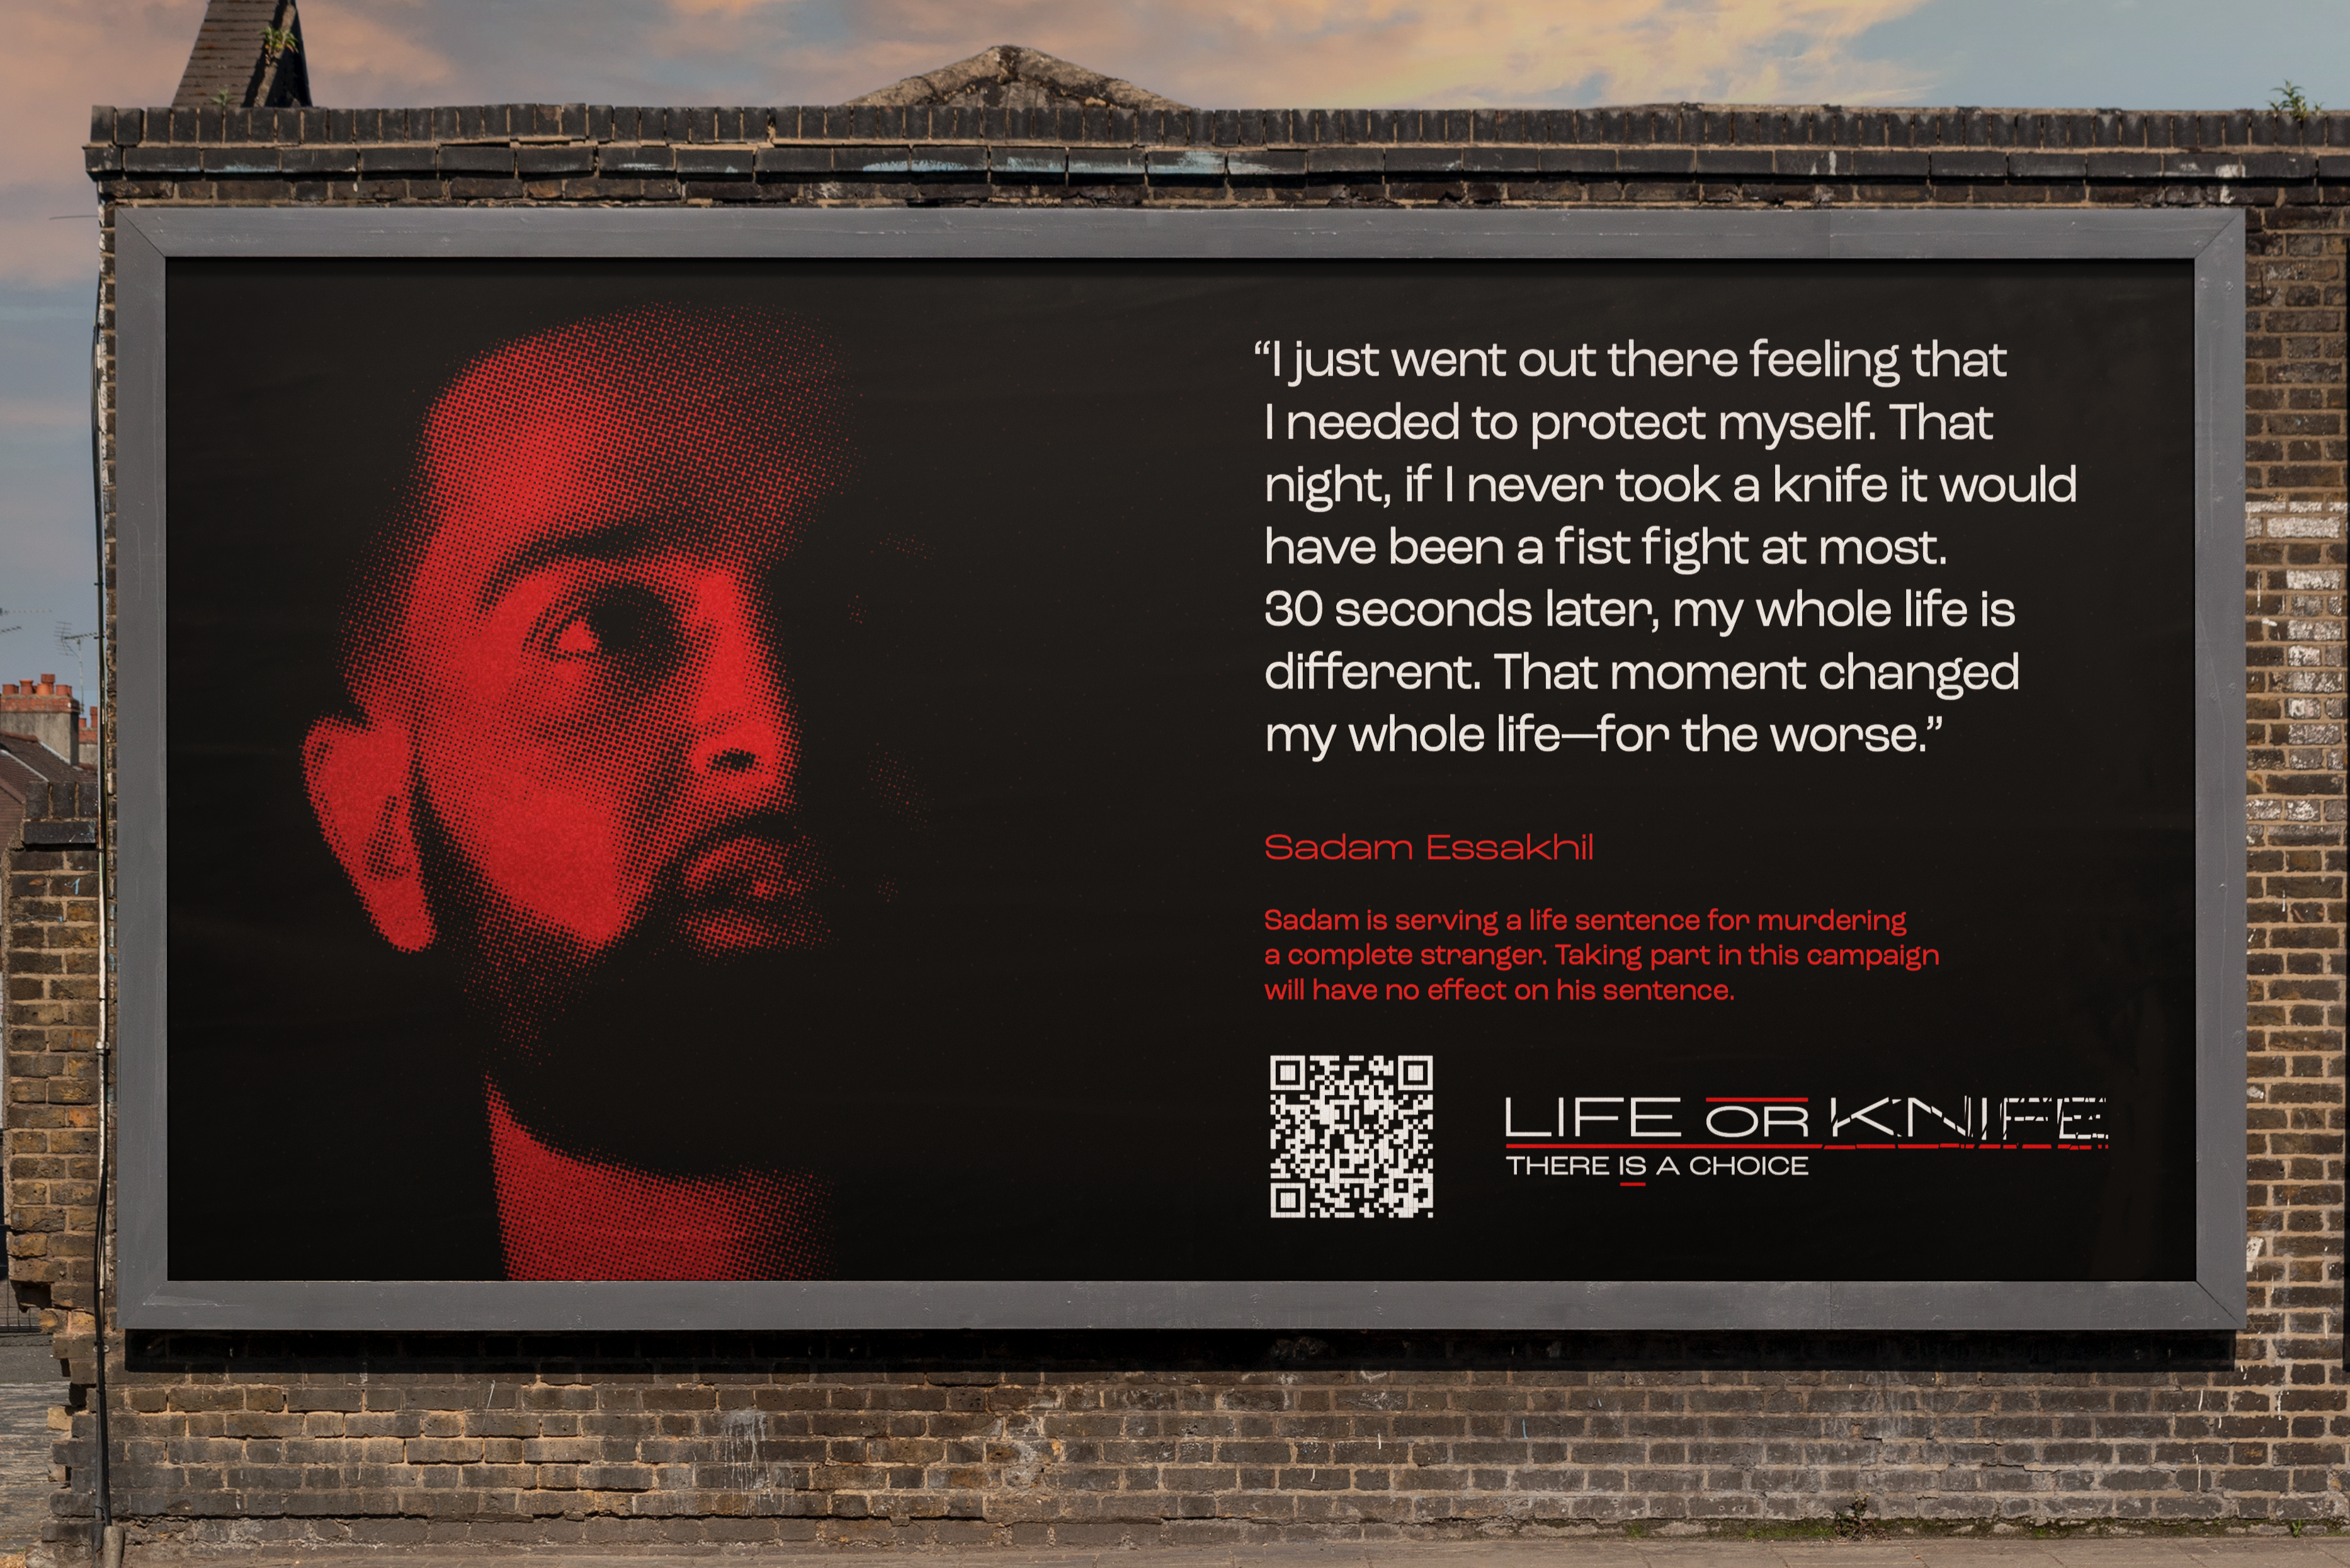 Image of billboard showing a high-contrast red and black image of convicted murderer Sadam Essakhil, with a quote reading “I just went out there feeling that I needed to protect myself. That night, if I never took a knife it would have been a fist fight at most.  30 seconds later, my whole life is different. That moment changed my whole life­—for the worse.”